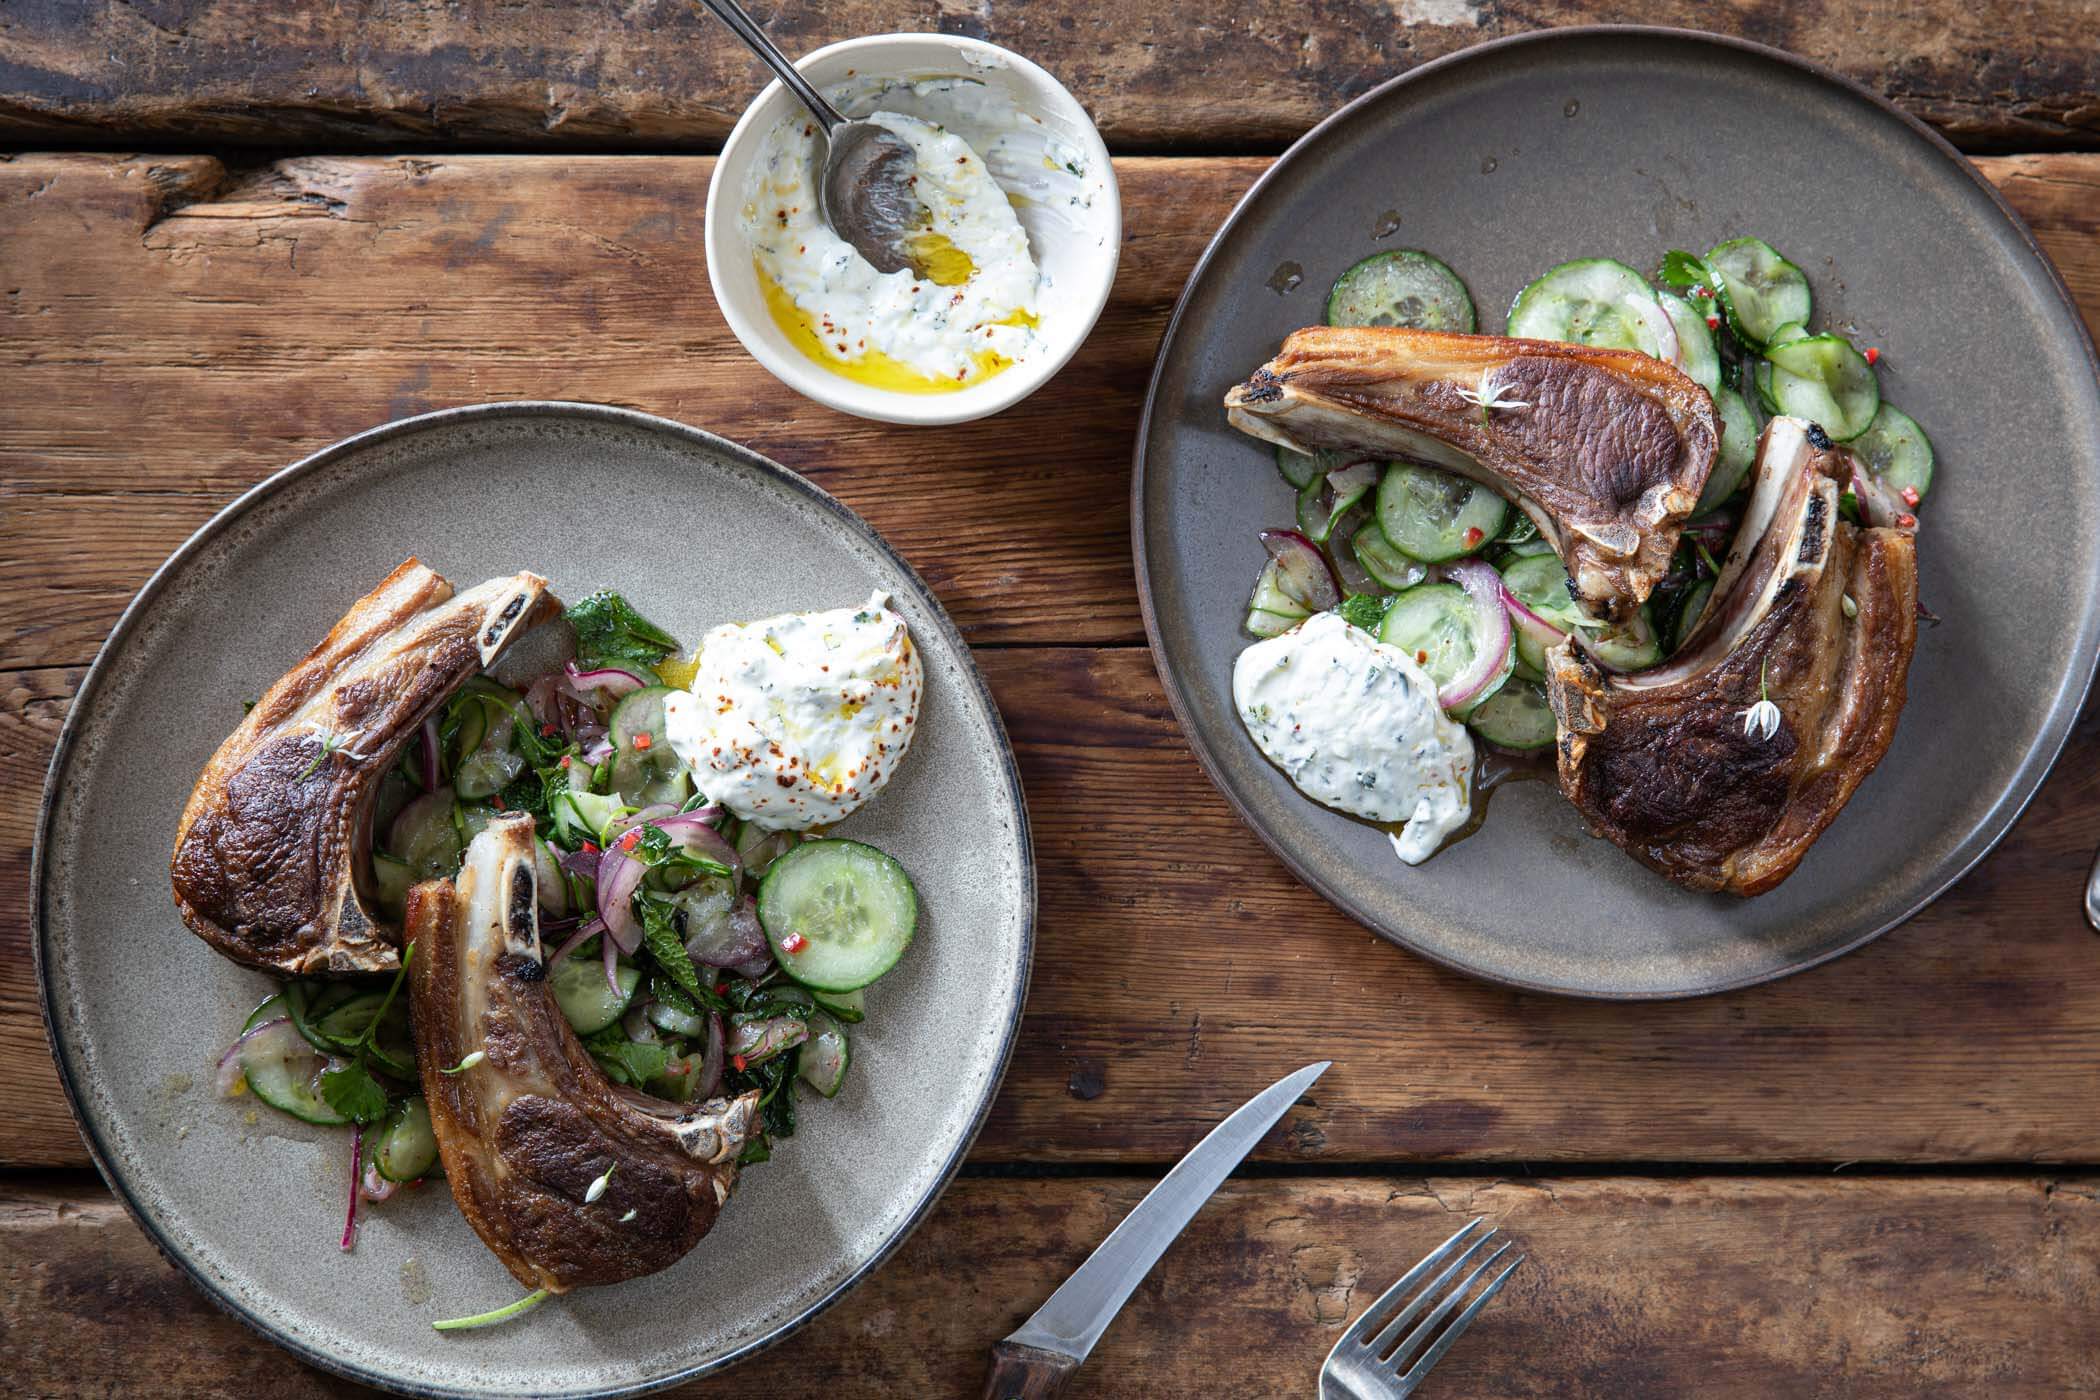 Cucumber, onion and herb salad, served with lamb chops and minted yoghurt.